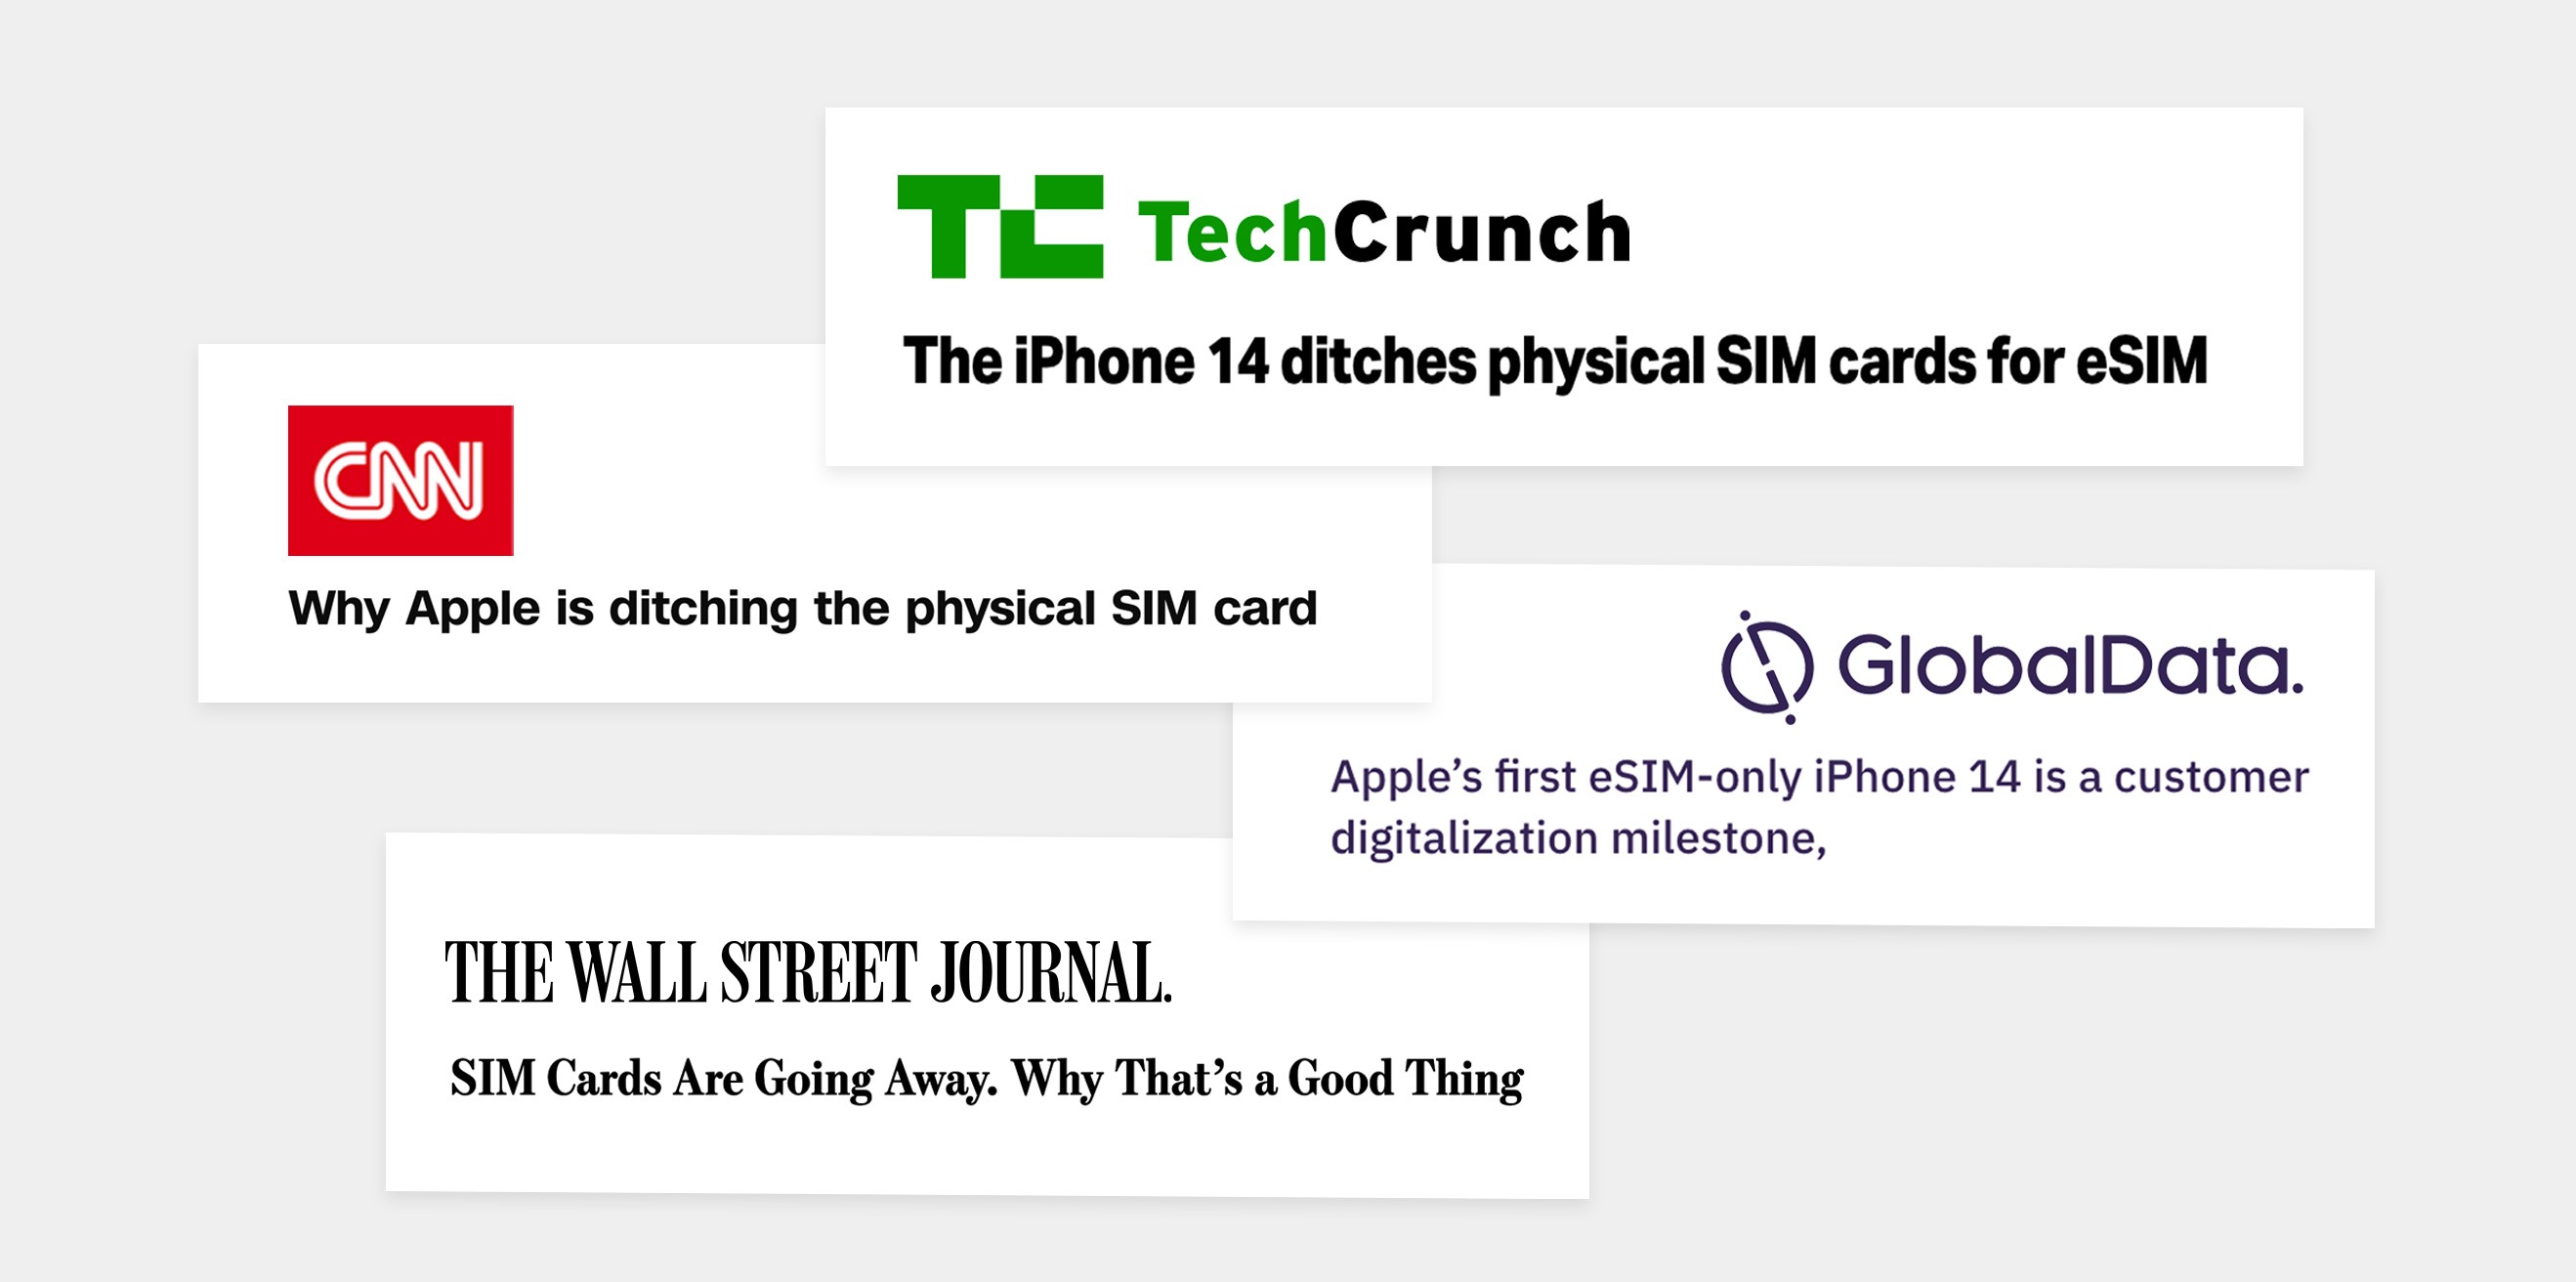 A collection of headlines showing global interest in the eSIM-only iPhone 14